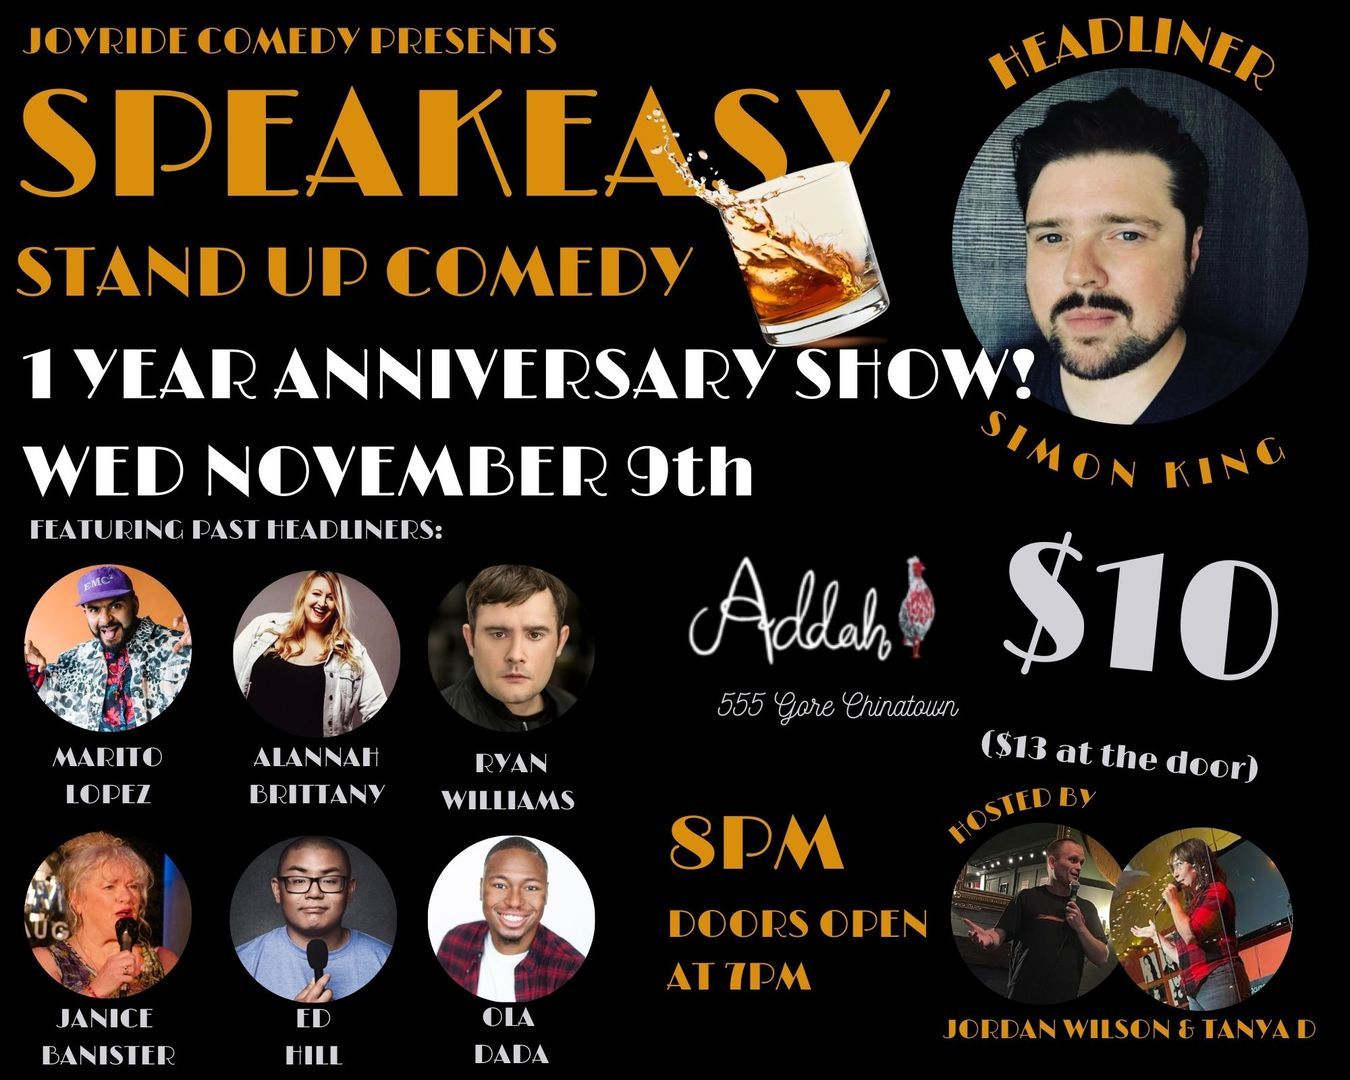 Speakeasy Stand-Up Comedy -- ANNIVERSARY SHOW, Vancouver, British Columbia, Canada